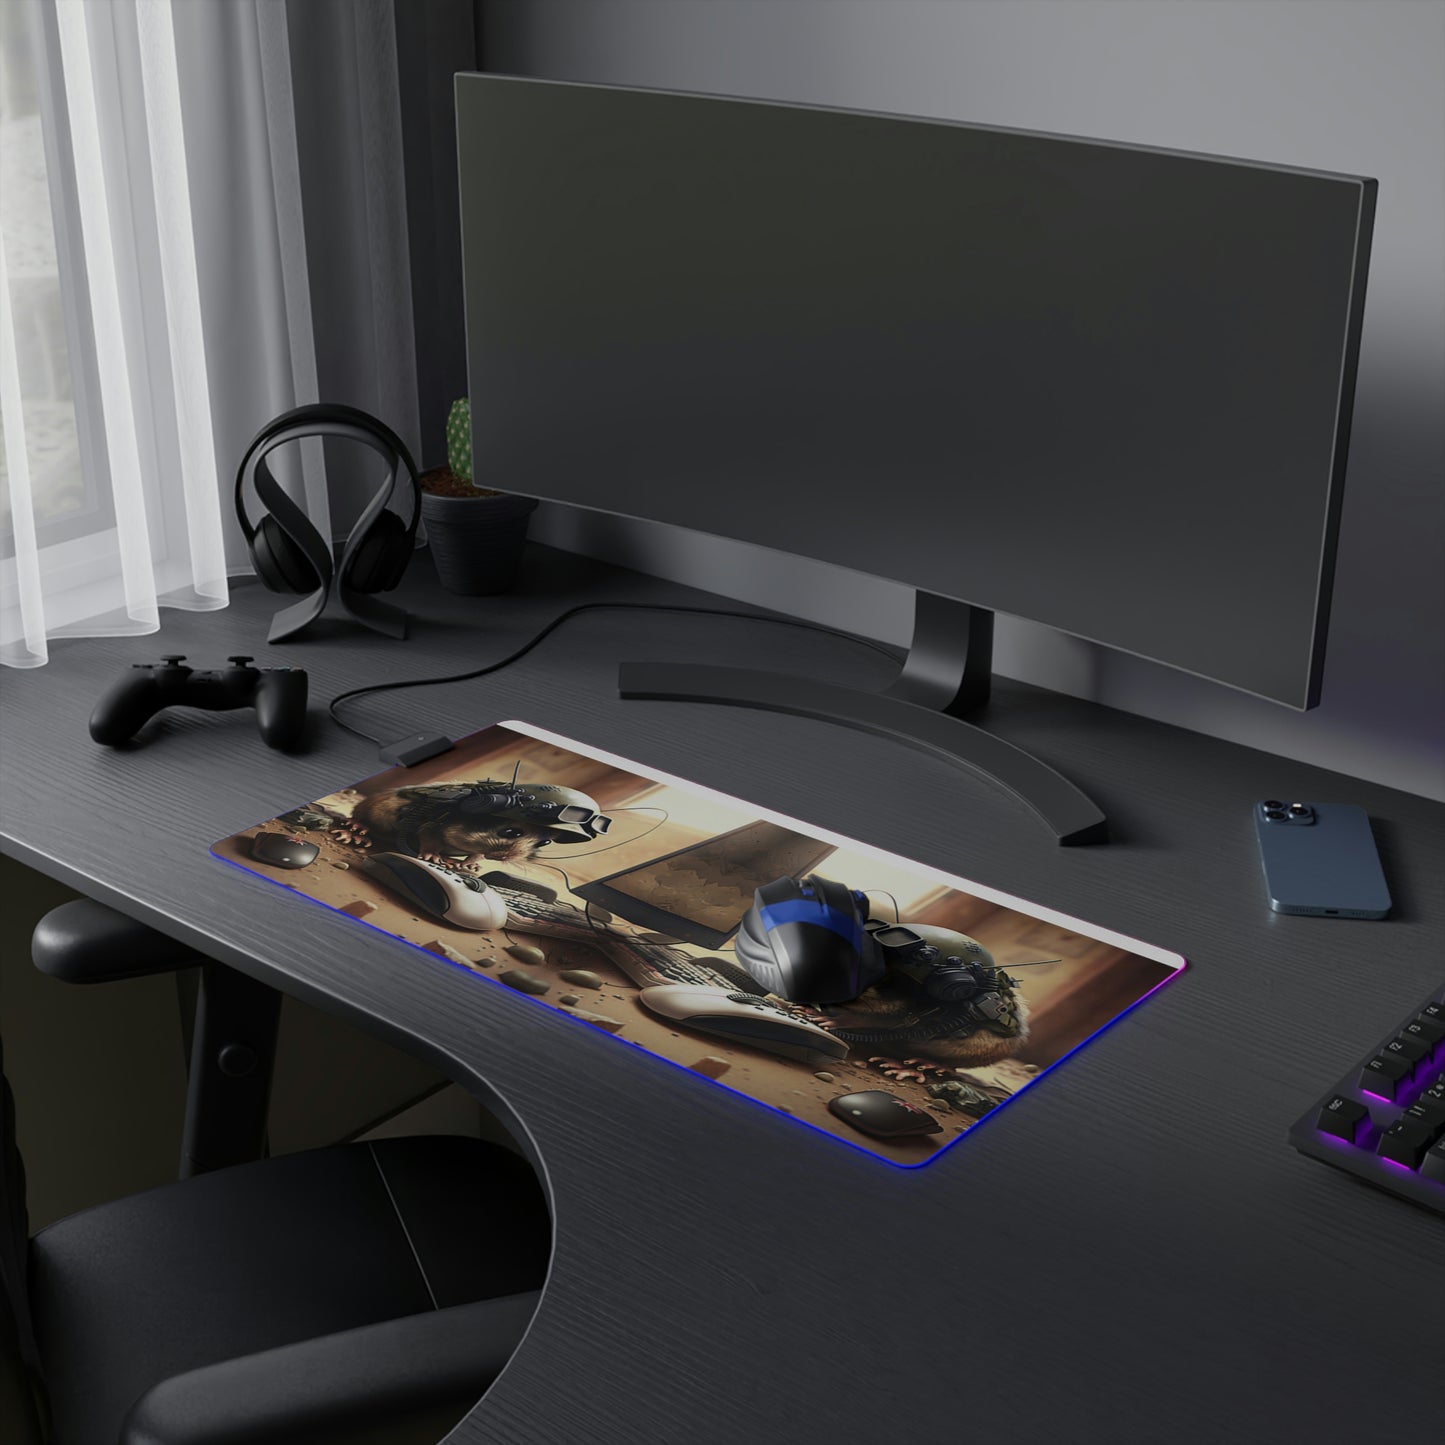 LED Gaming Mouse Pad Mouse Attack 2